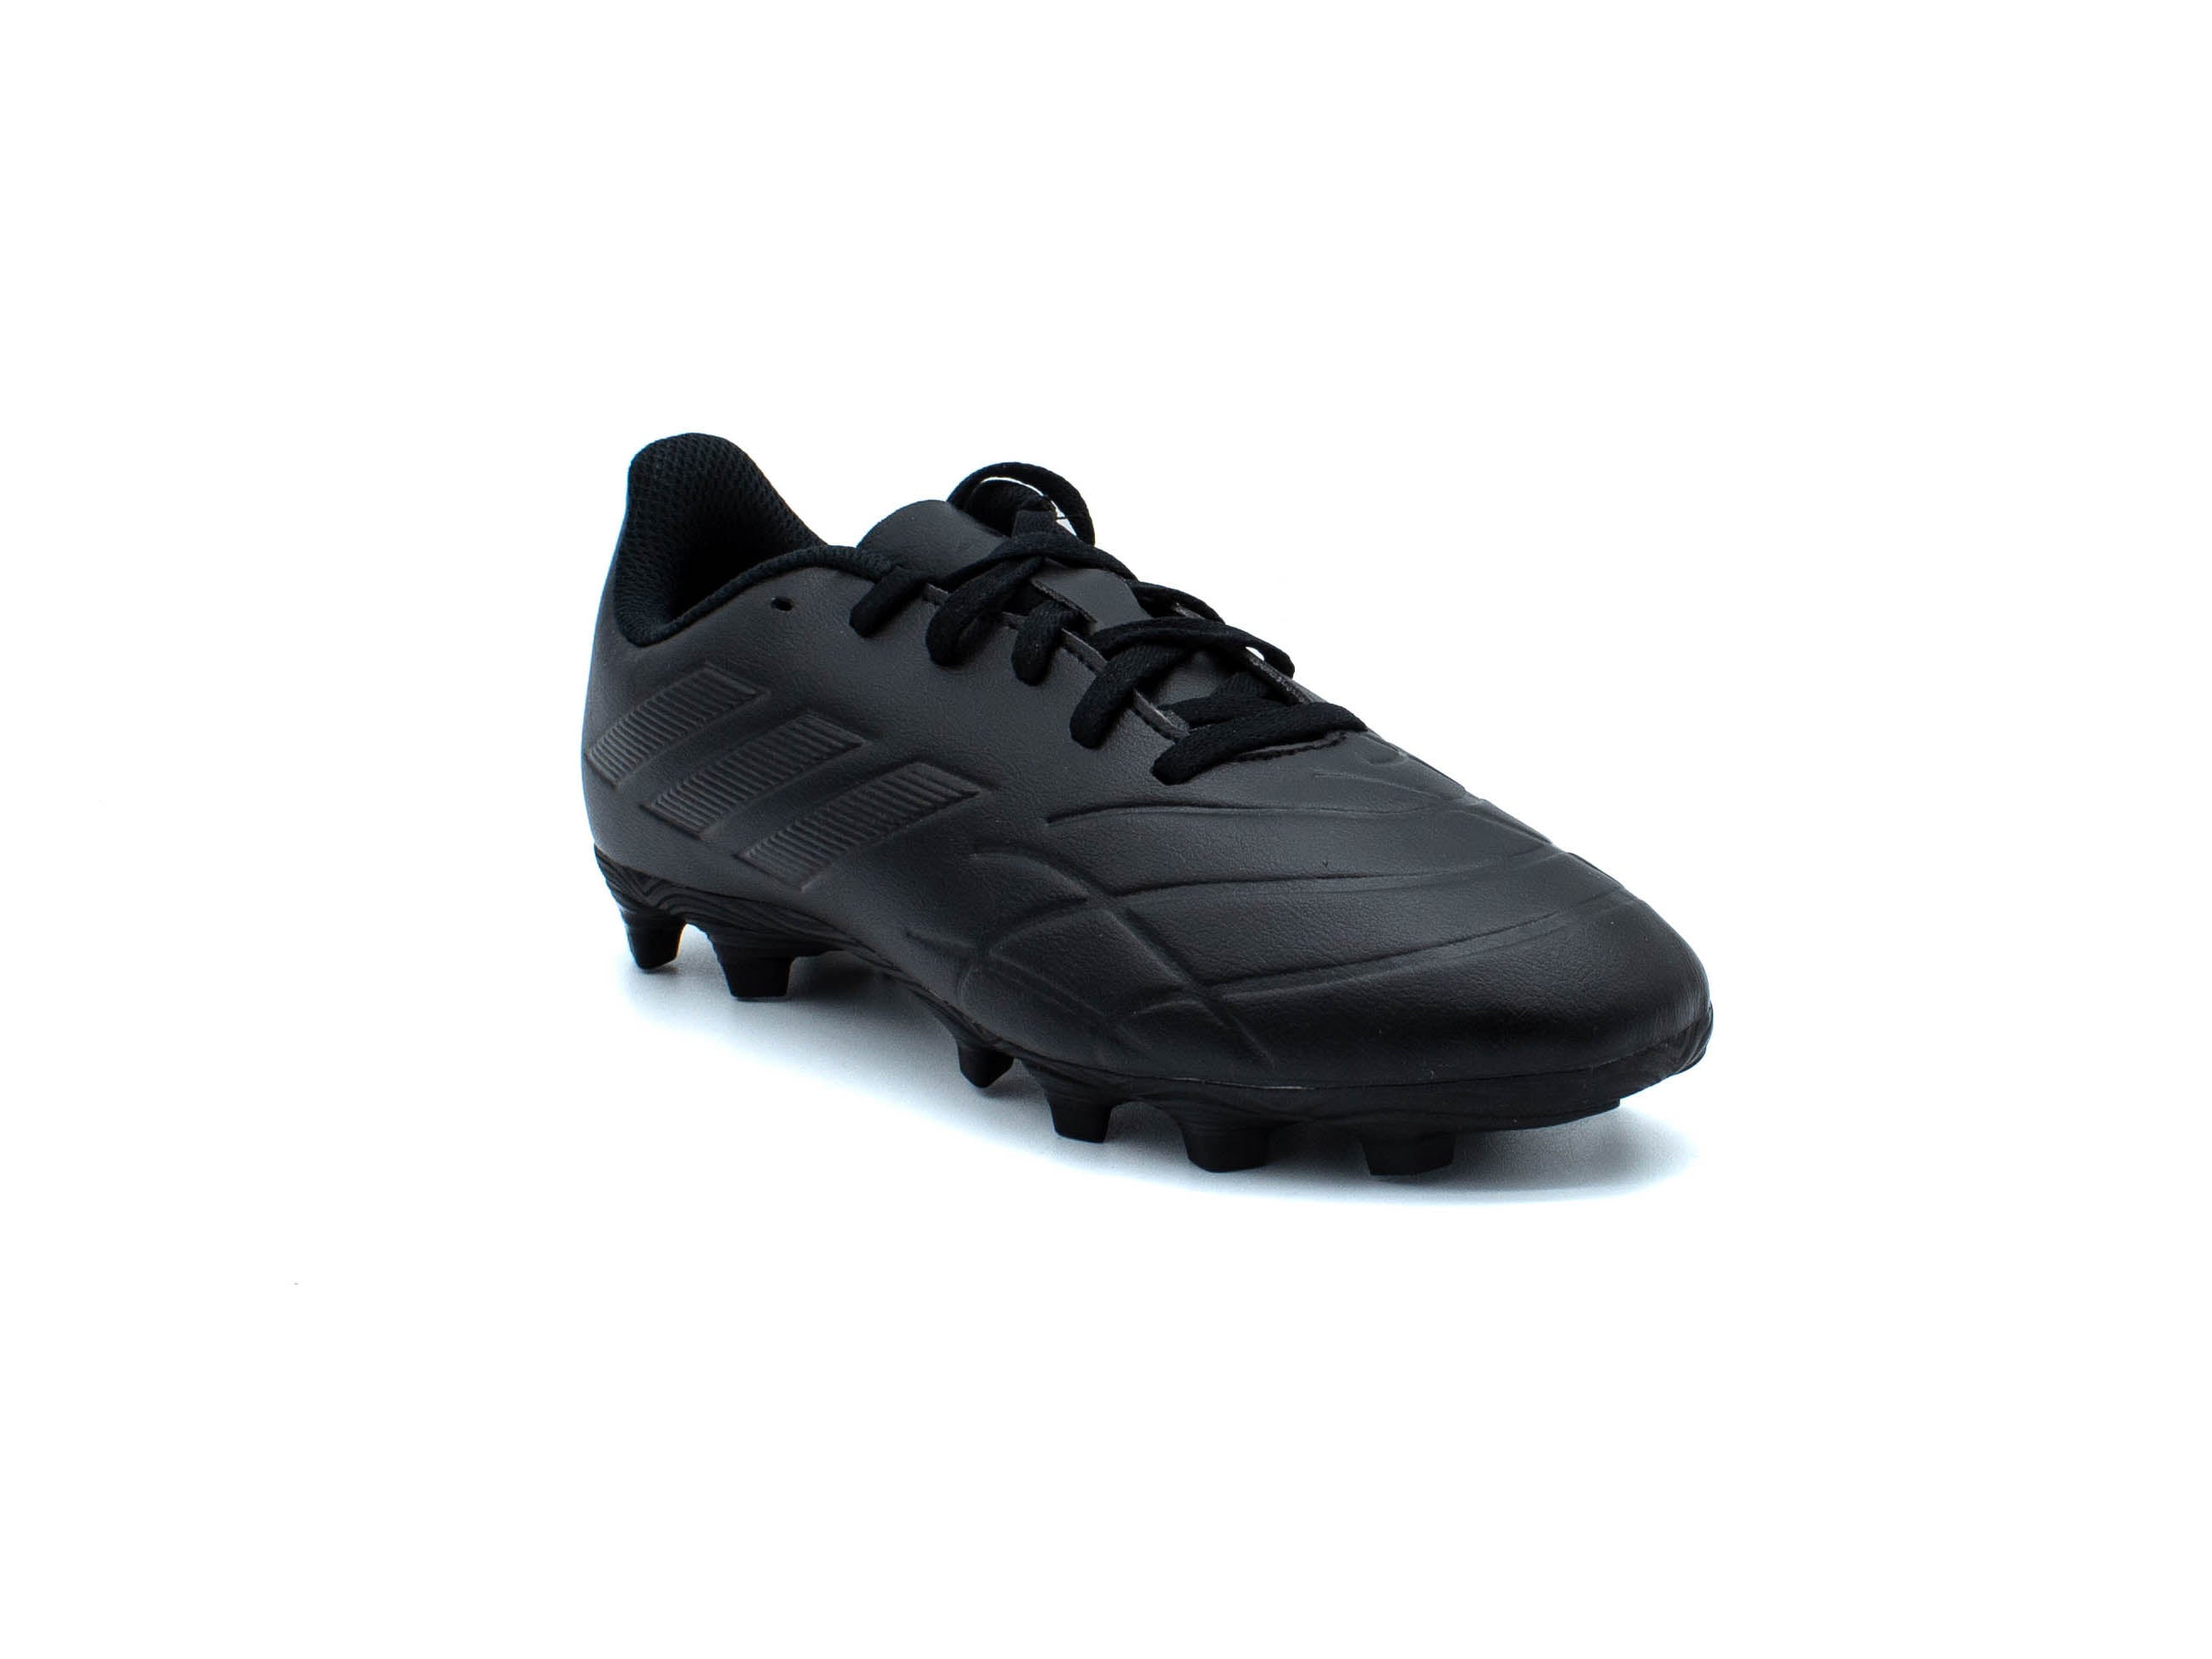 ADIDAS COPA PURE.4 FLEXIBLE GROUND BOOTS